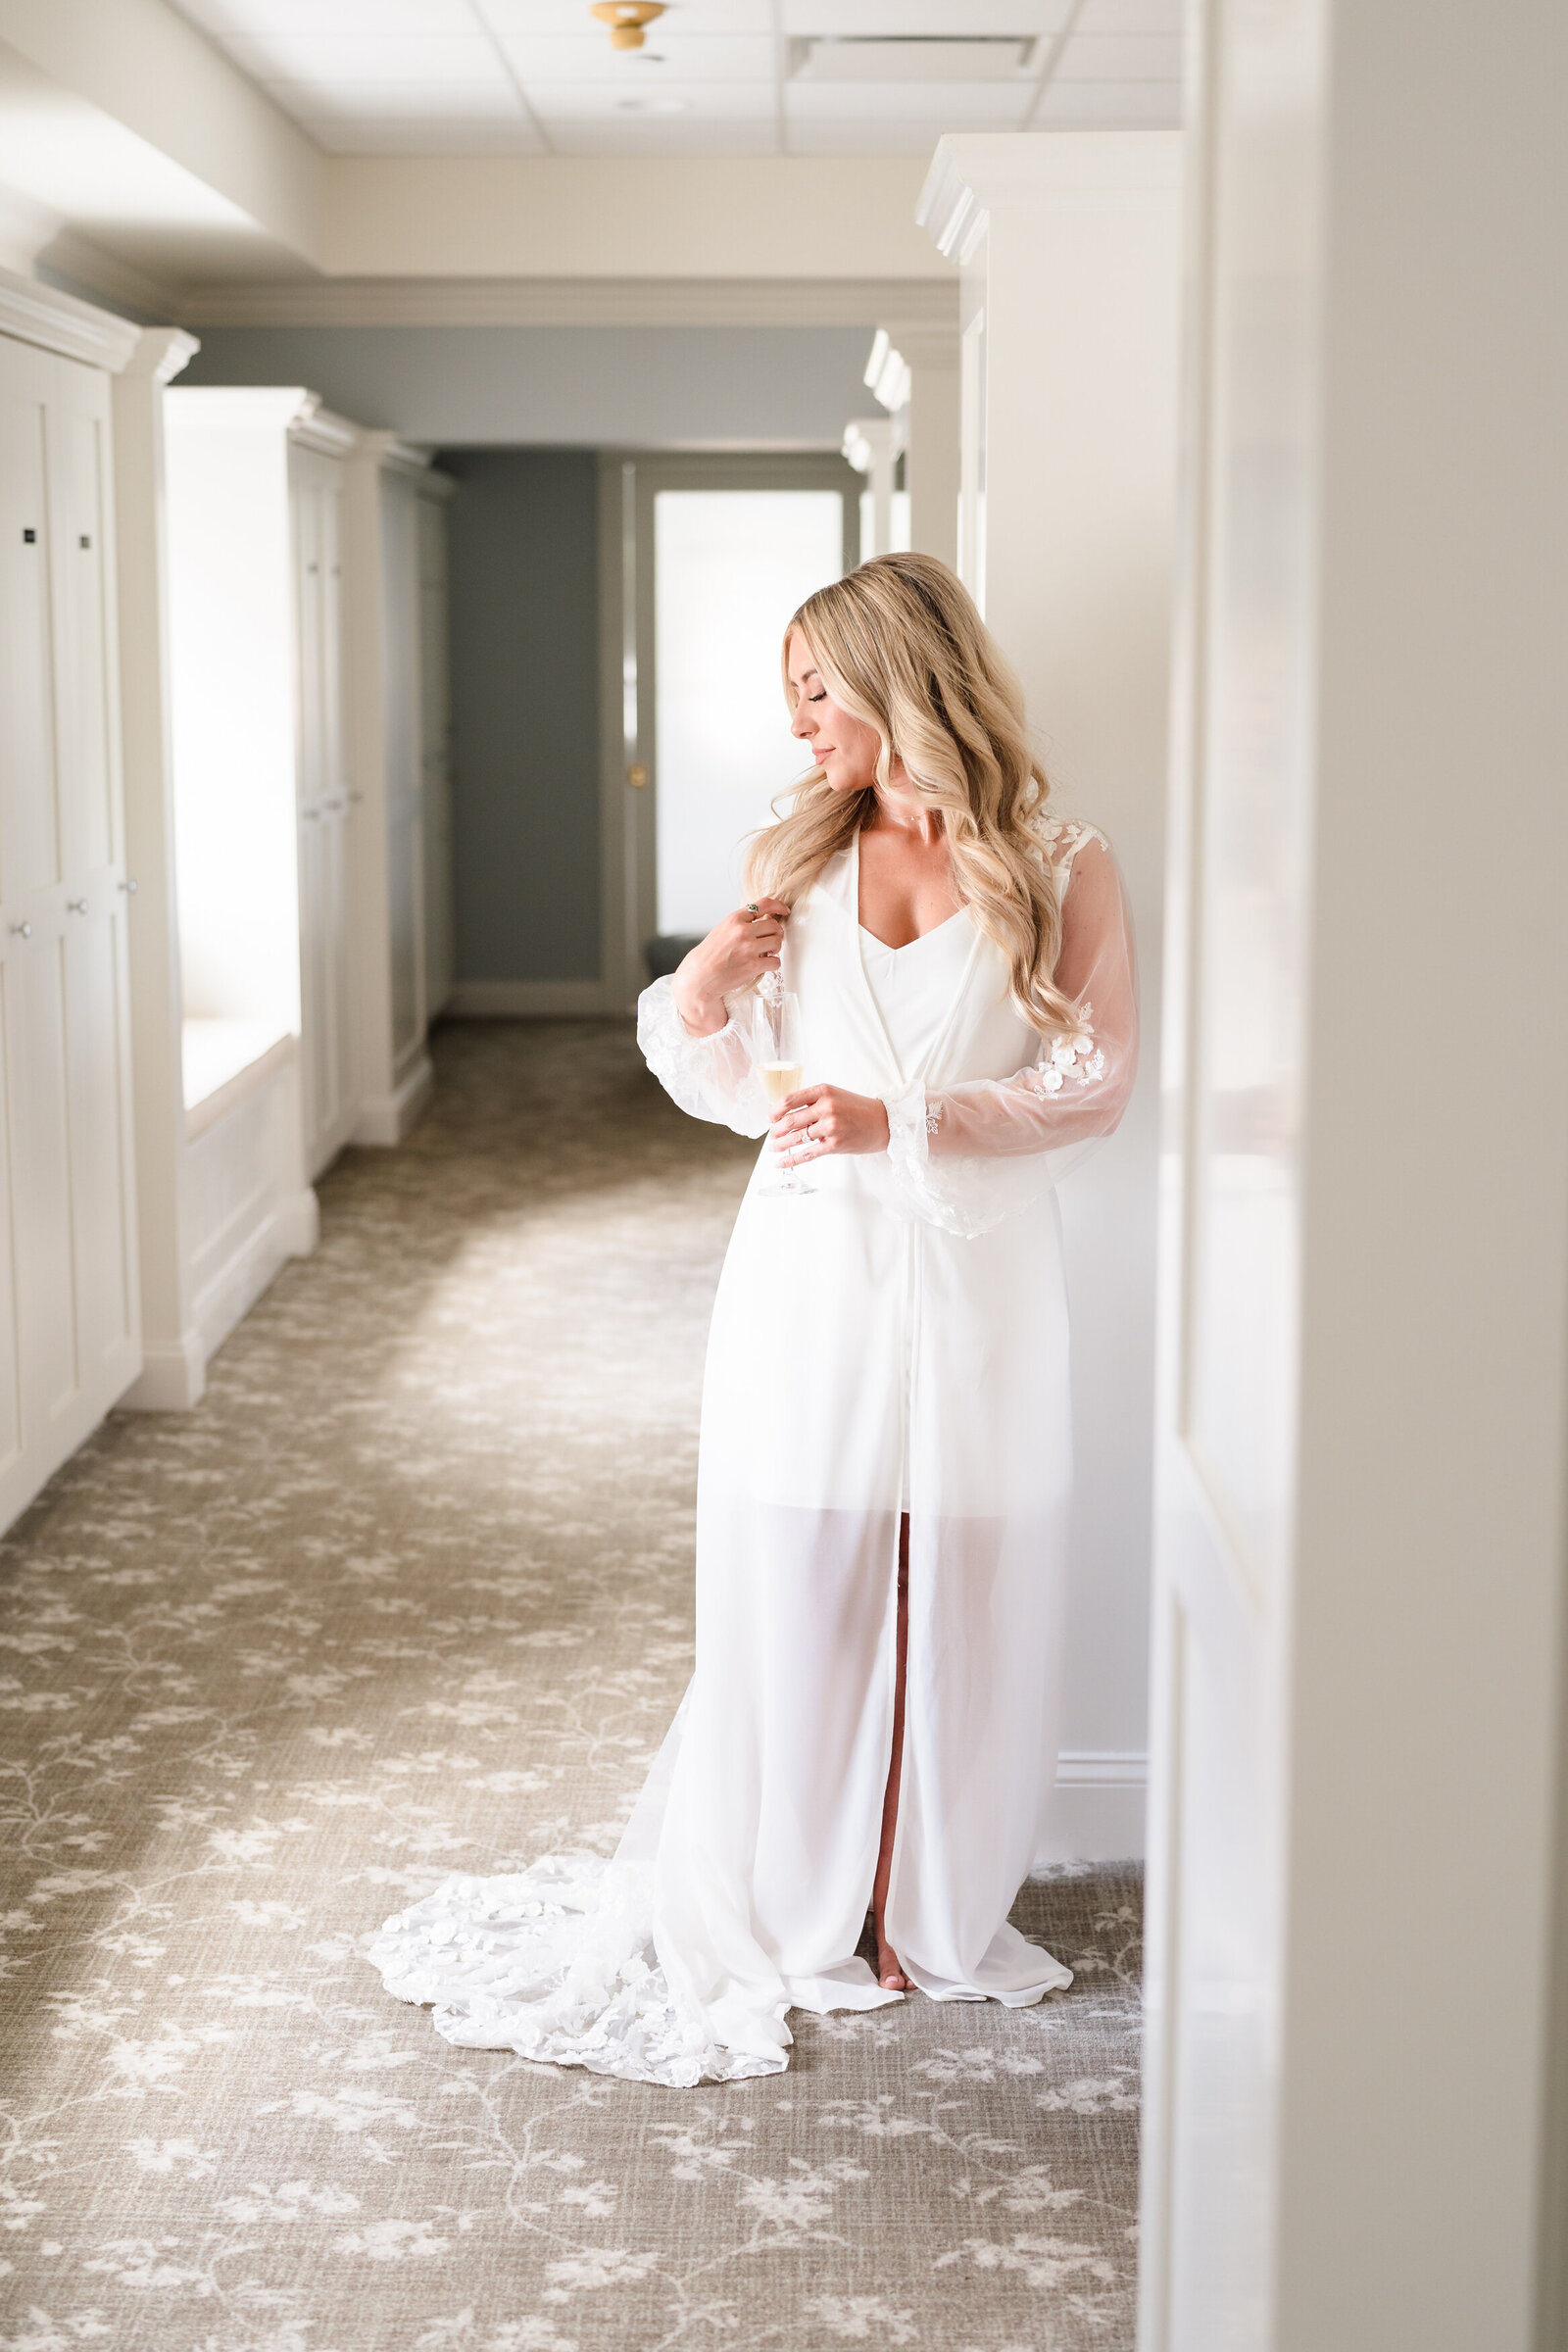 Bride holds a glass of champagne and strokes her hair as she stands in a window-light hallway wearing her getting ready robe